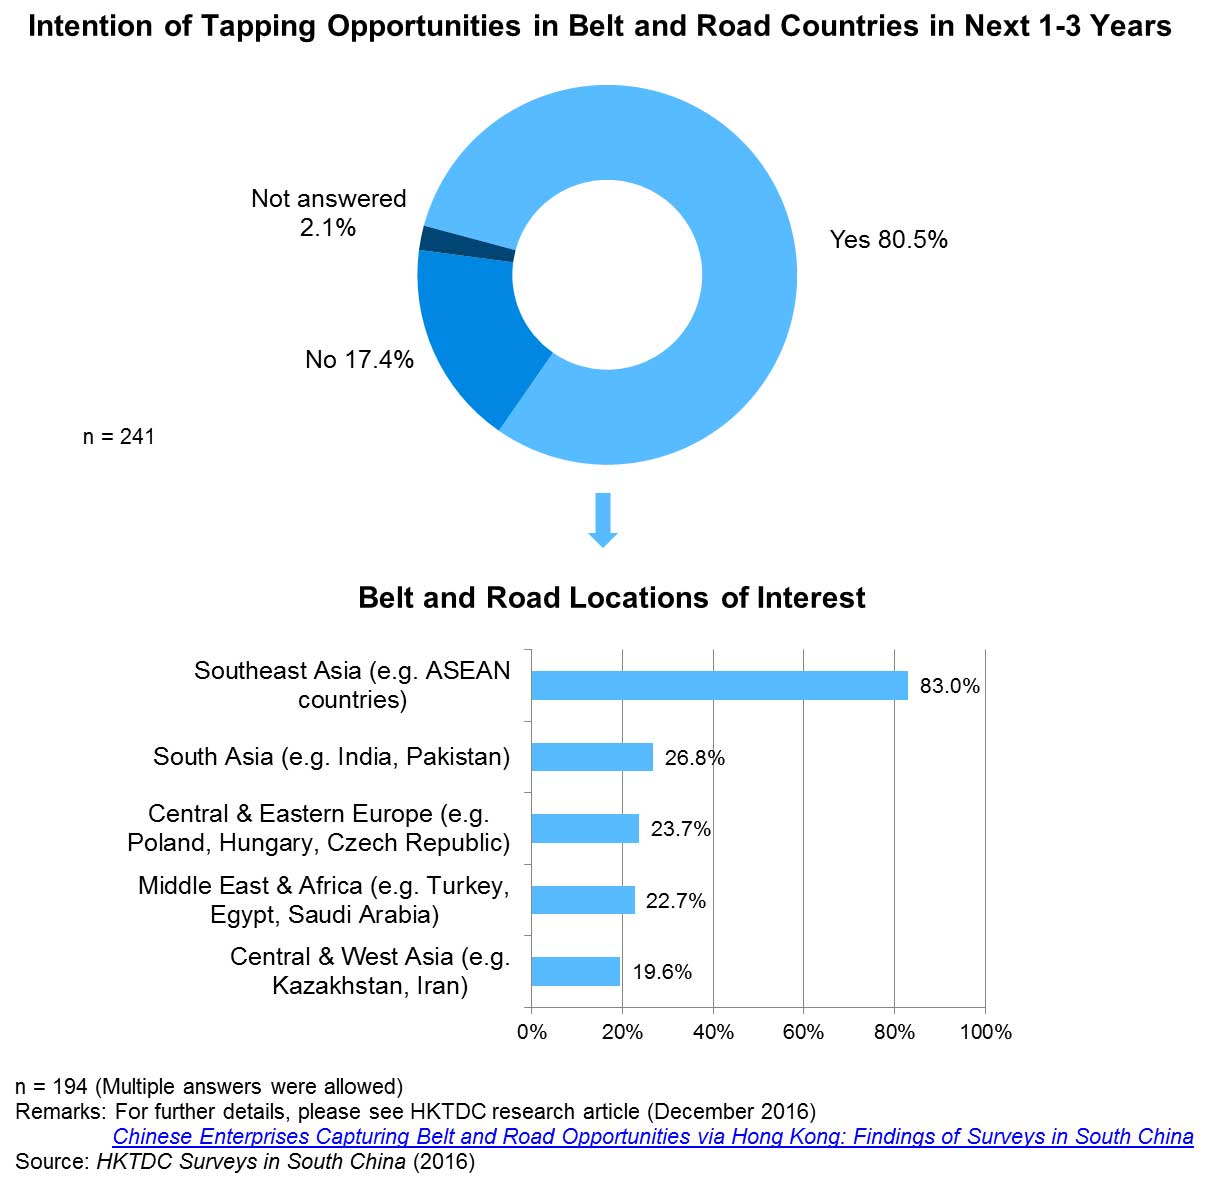 Chart: Intention of Tapping Opportunities in Belt and Road Countries in Next 1-3 Years